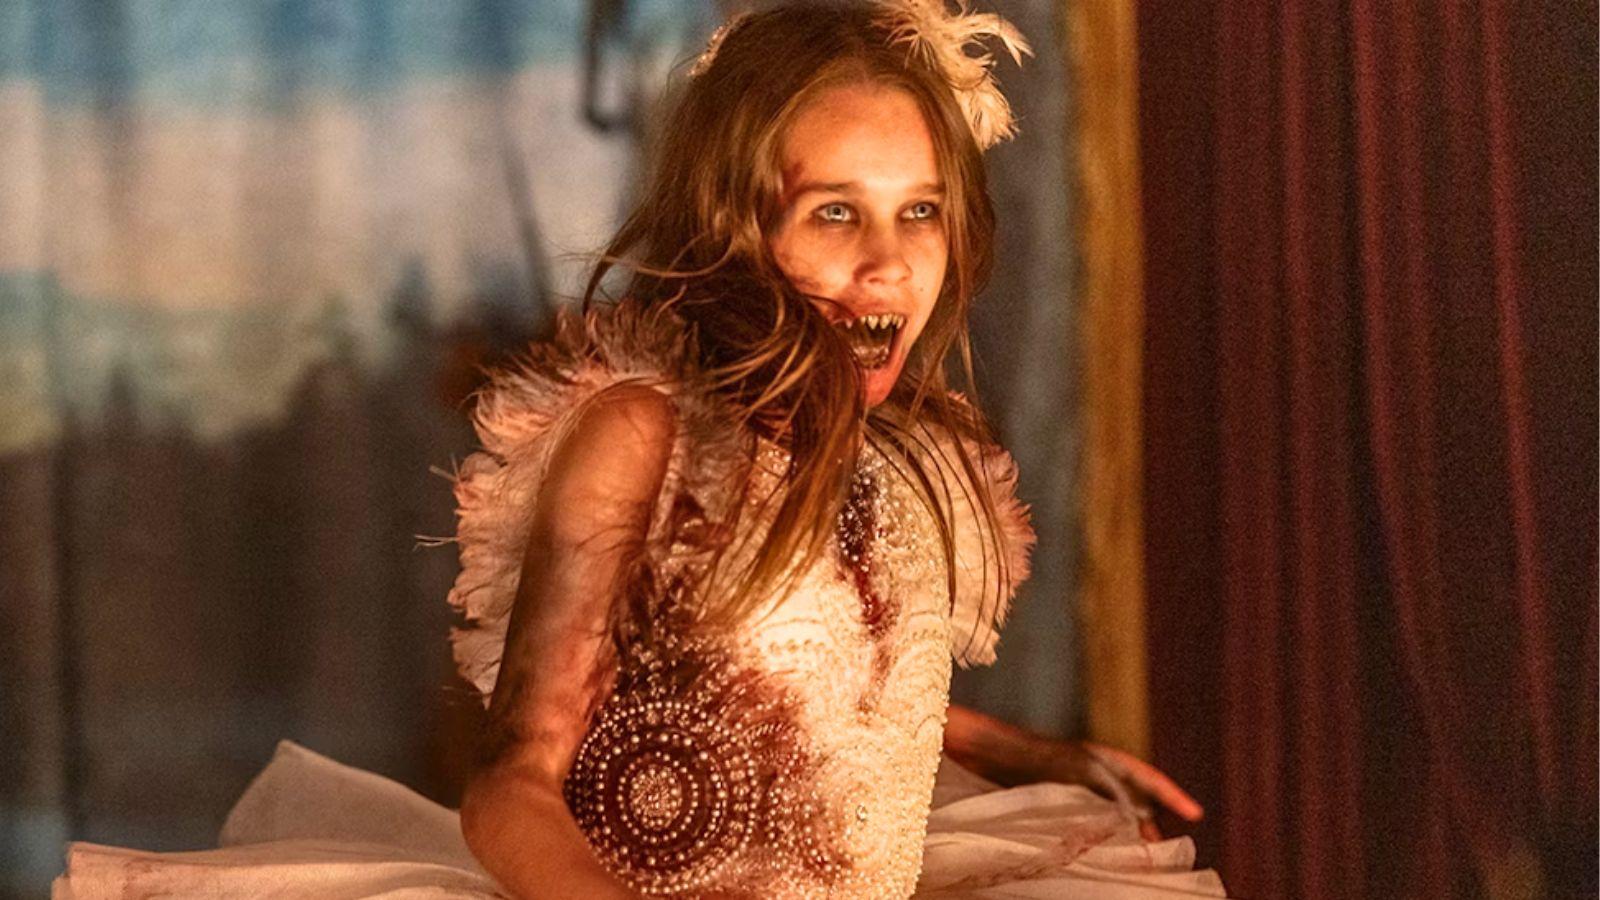 Alisha Weir as Abigail. She stands in a ballerina dress with blood stains and her fangs visible.